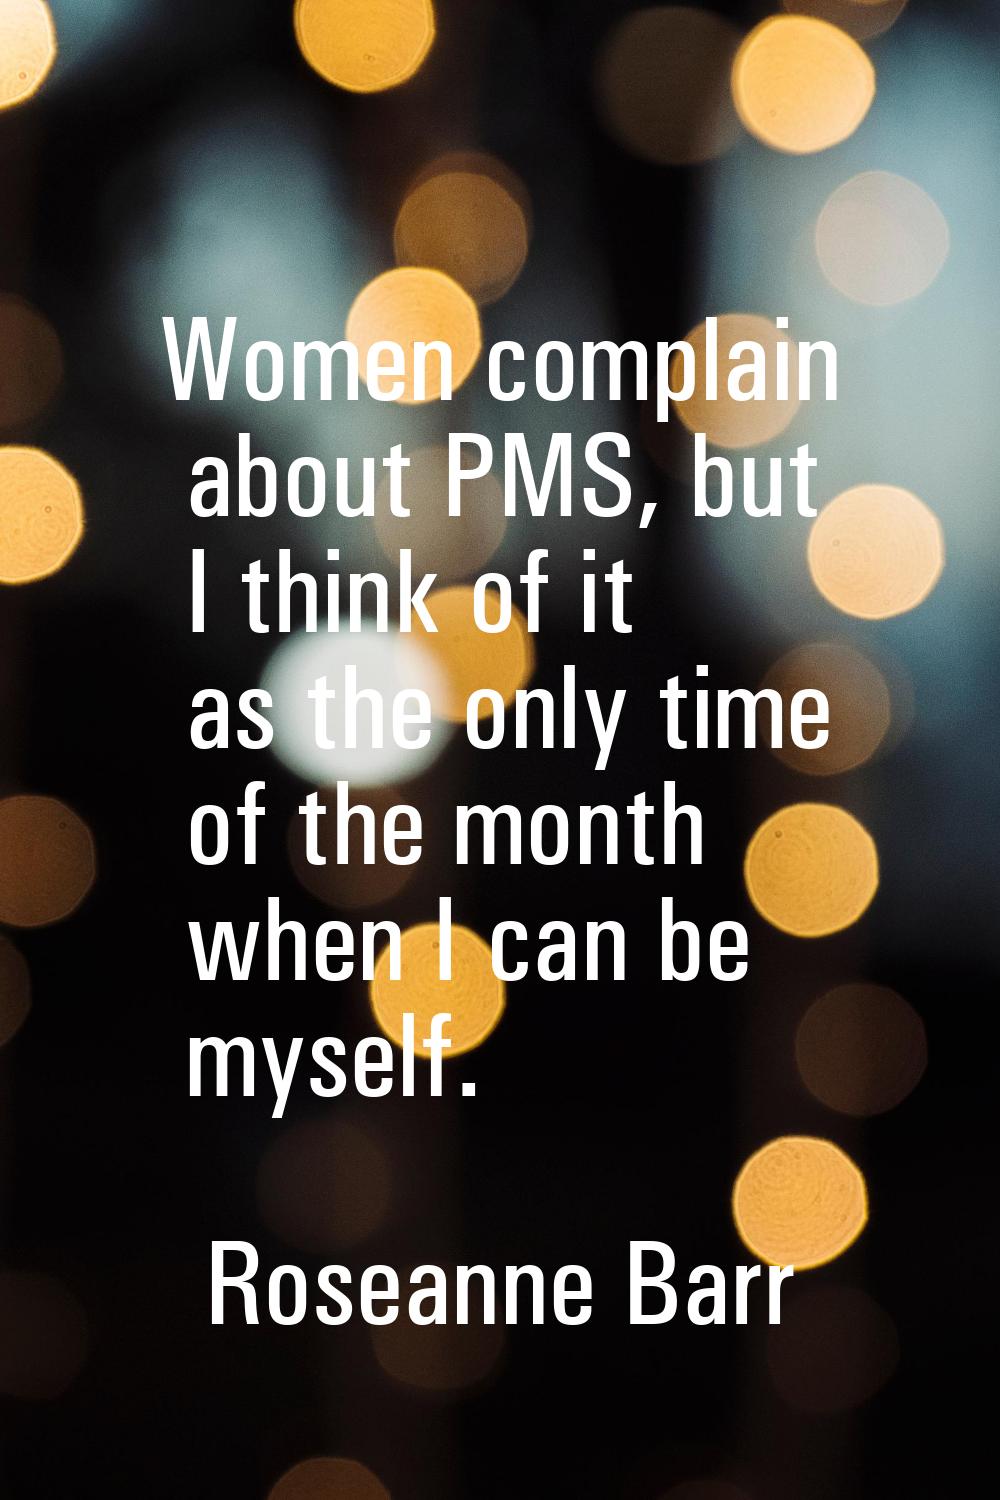 Women complain about PMS, but I think of it as the only time of the month when I can be myself.